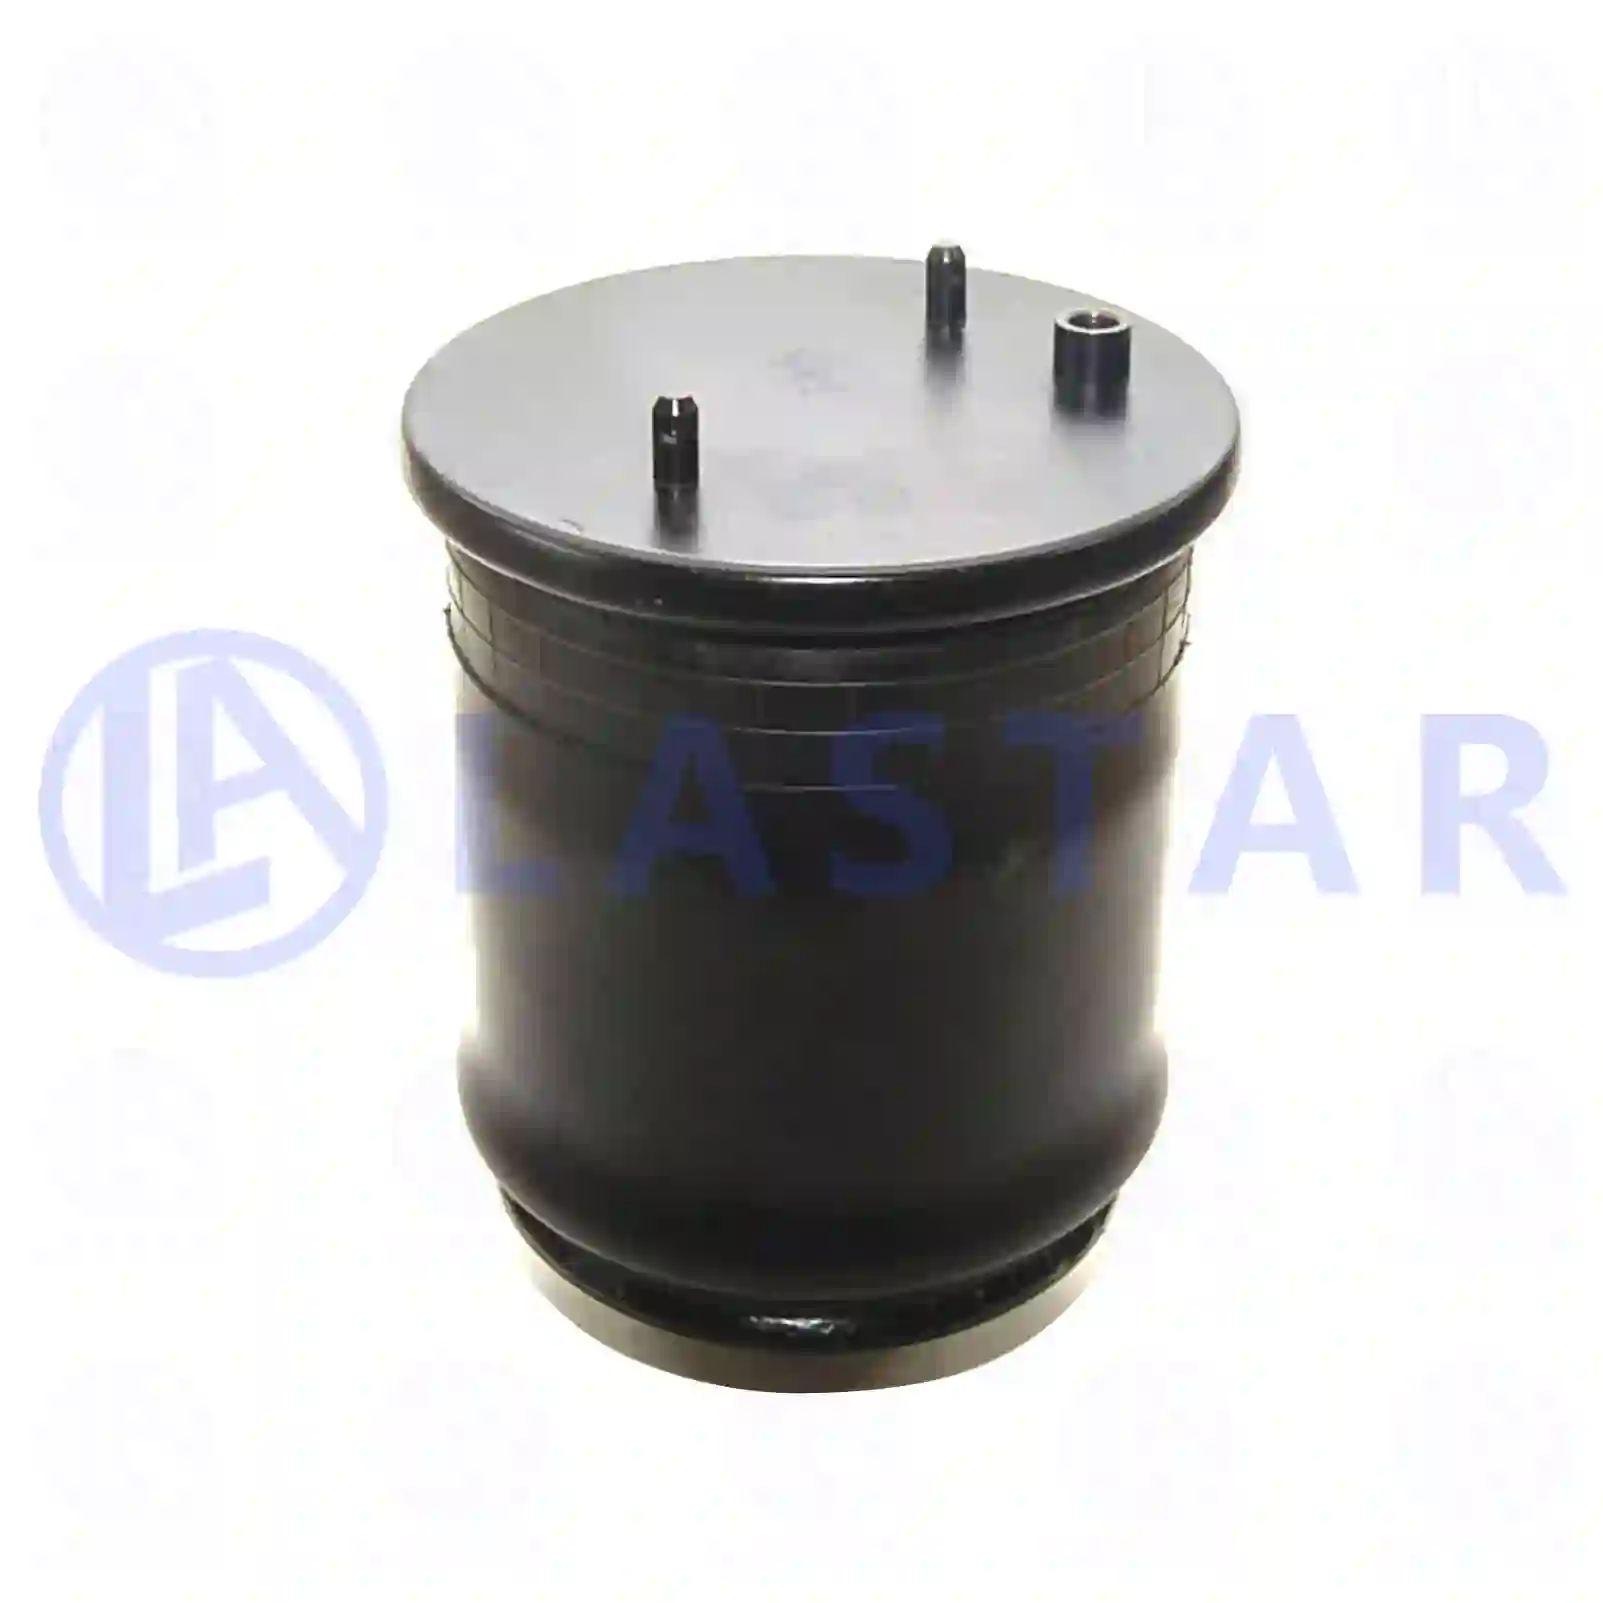 Air spring, with steel piston, 77727077, 1726241, , , ||  77727077 Lastar Spare Part | Truck Spare Parts, Auotomotive Spare Parts Air spring, with steel piston, 77727077, 1726241, , , ||  77727077 Lastar Spare Part | Truck Spare Parts, Auotomotive Spare Parts